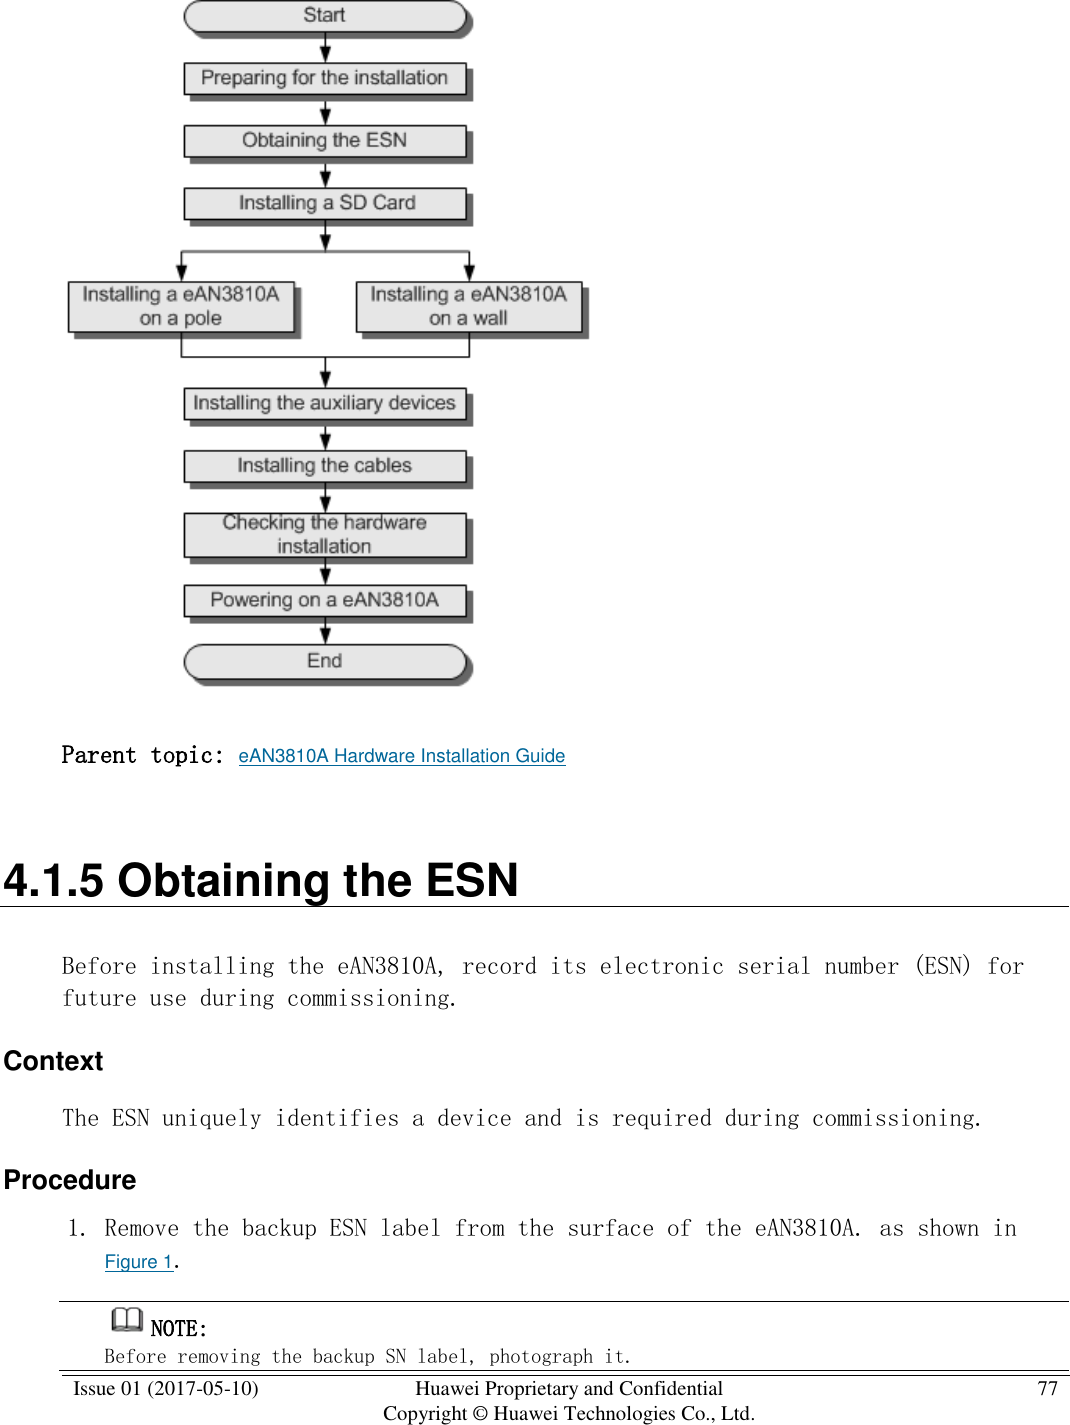  Issue 01 (2017-05-10) Huawei Proprietary and Confidential      Copyright © Huawei Technologies Co., Ltd. 77    Parent topic: eAN3810A Hardware Installation Guide 4.1.5 Obtaining the ESN Before installing the eAN3810A, record its electronic serial number (ESN) for future use during commissioning. Context The ESN uniquely identifies a device and is required during commissioning. Procedure 1. Remove the backup ESN label from the surface of the eAN3810A. as shown in Figure 1.  NOTE:  Before removing the backup SN label, photograph it.  